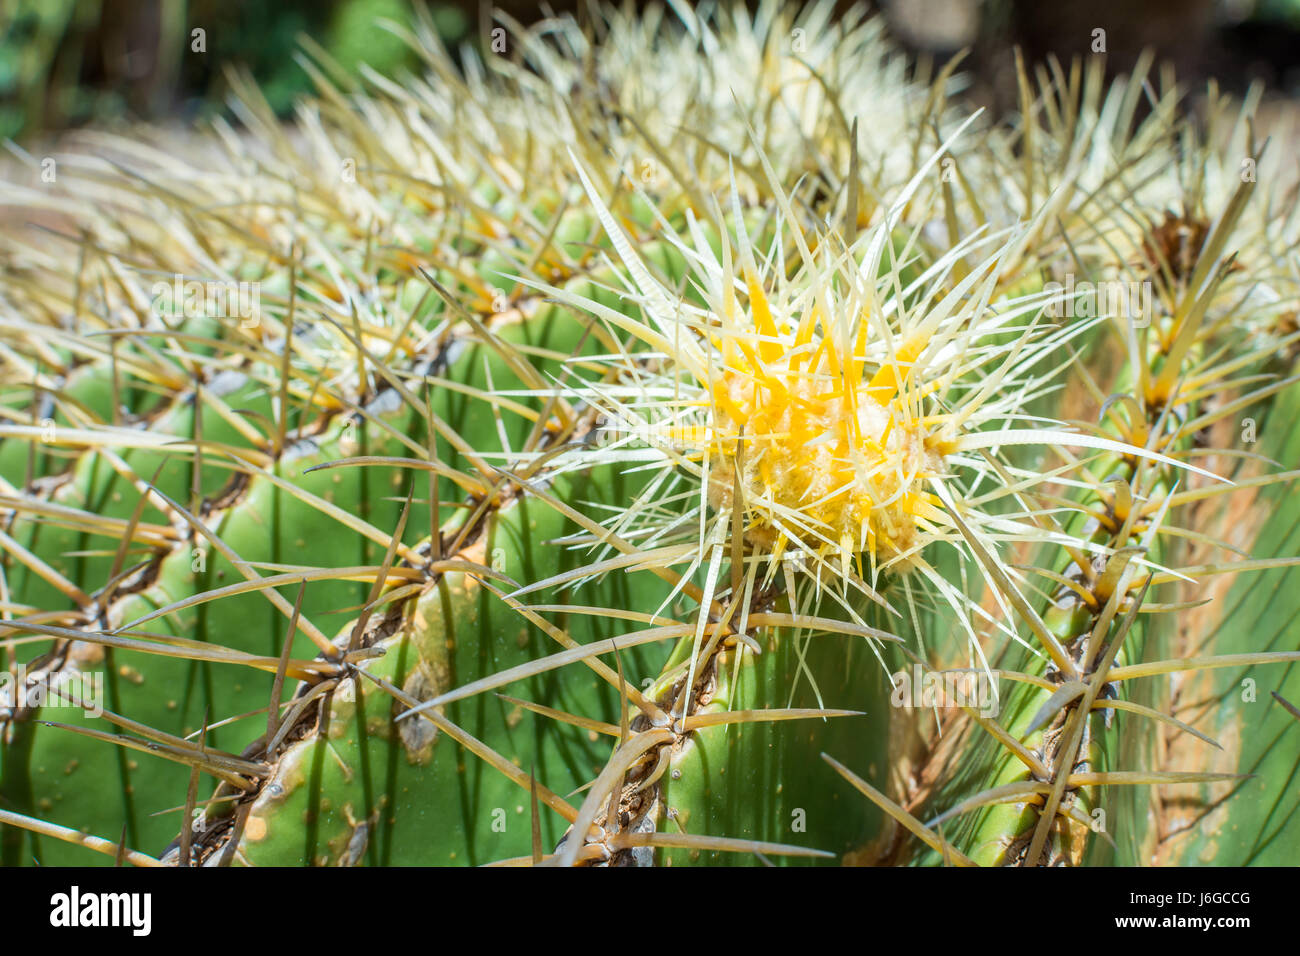 Close Up Of The Tiny Yellow And White Bud Of A Golden Barrel Cactus Stock Photo Alamy